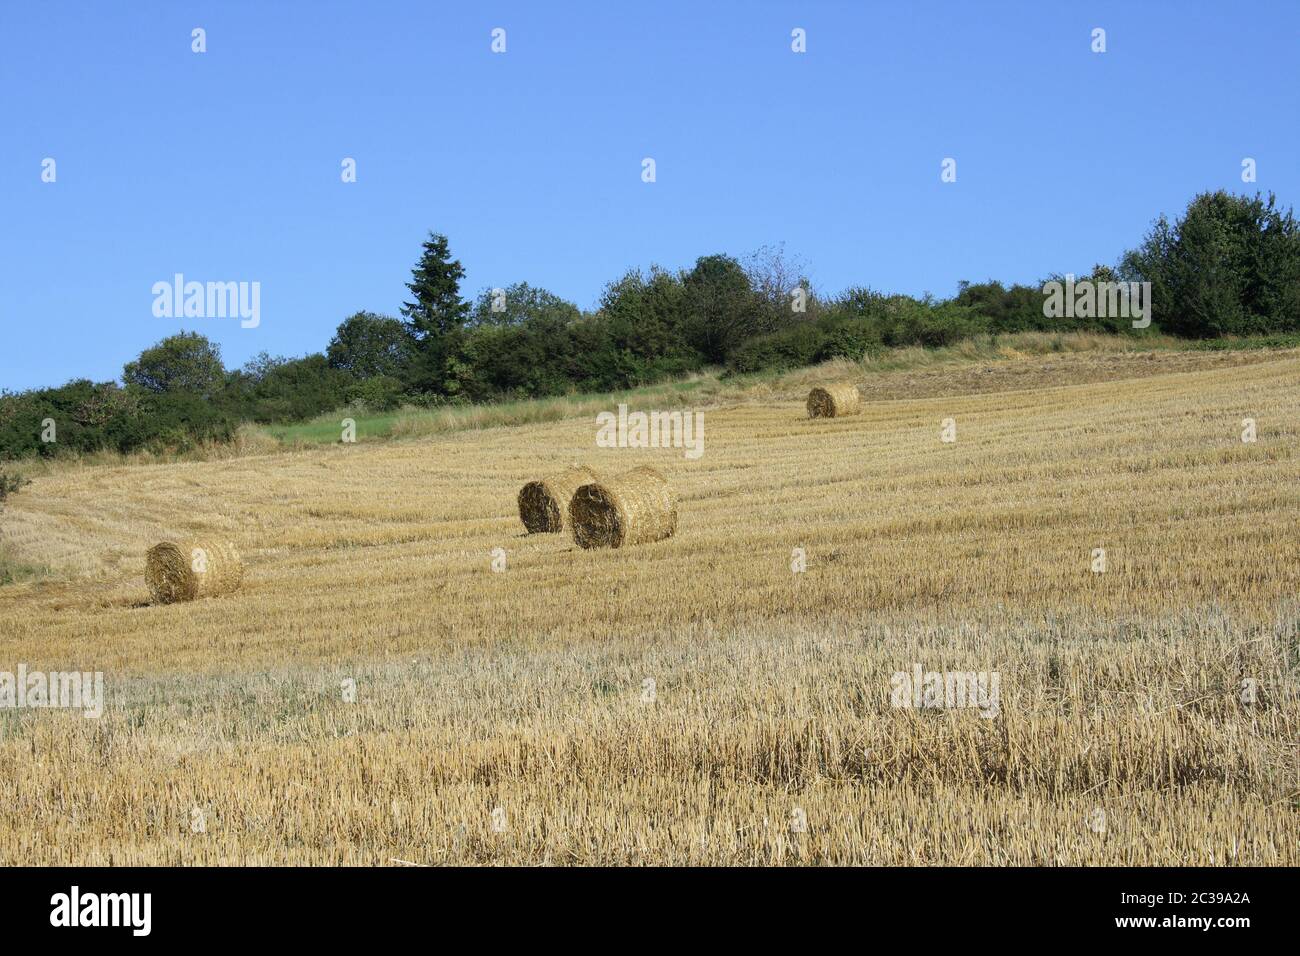 A Harvested grain field with straw rolls, forest in the background Stock Photo